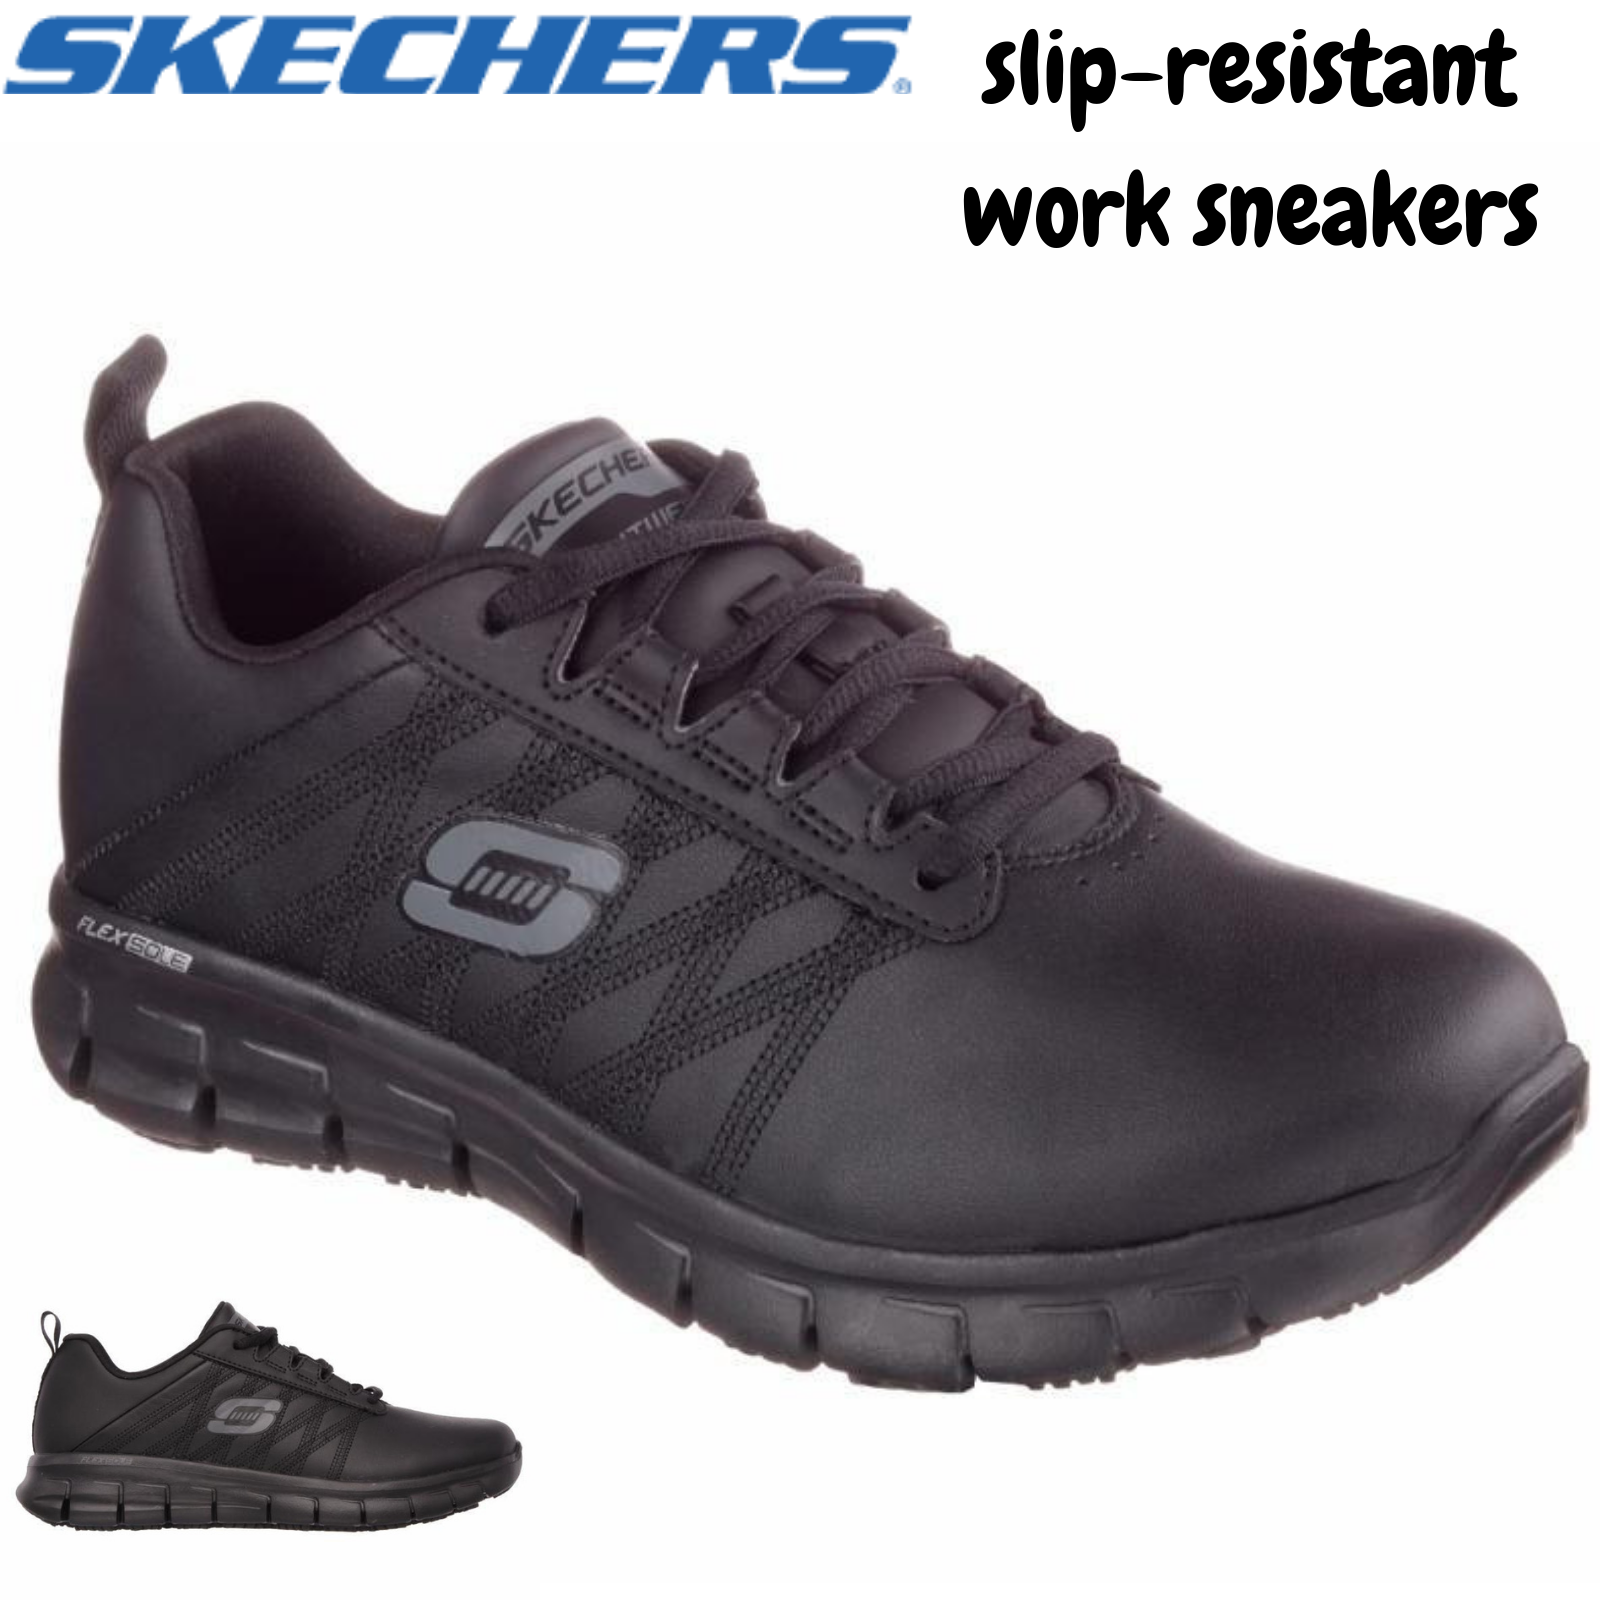 leather work sneakers